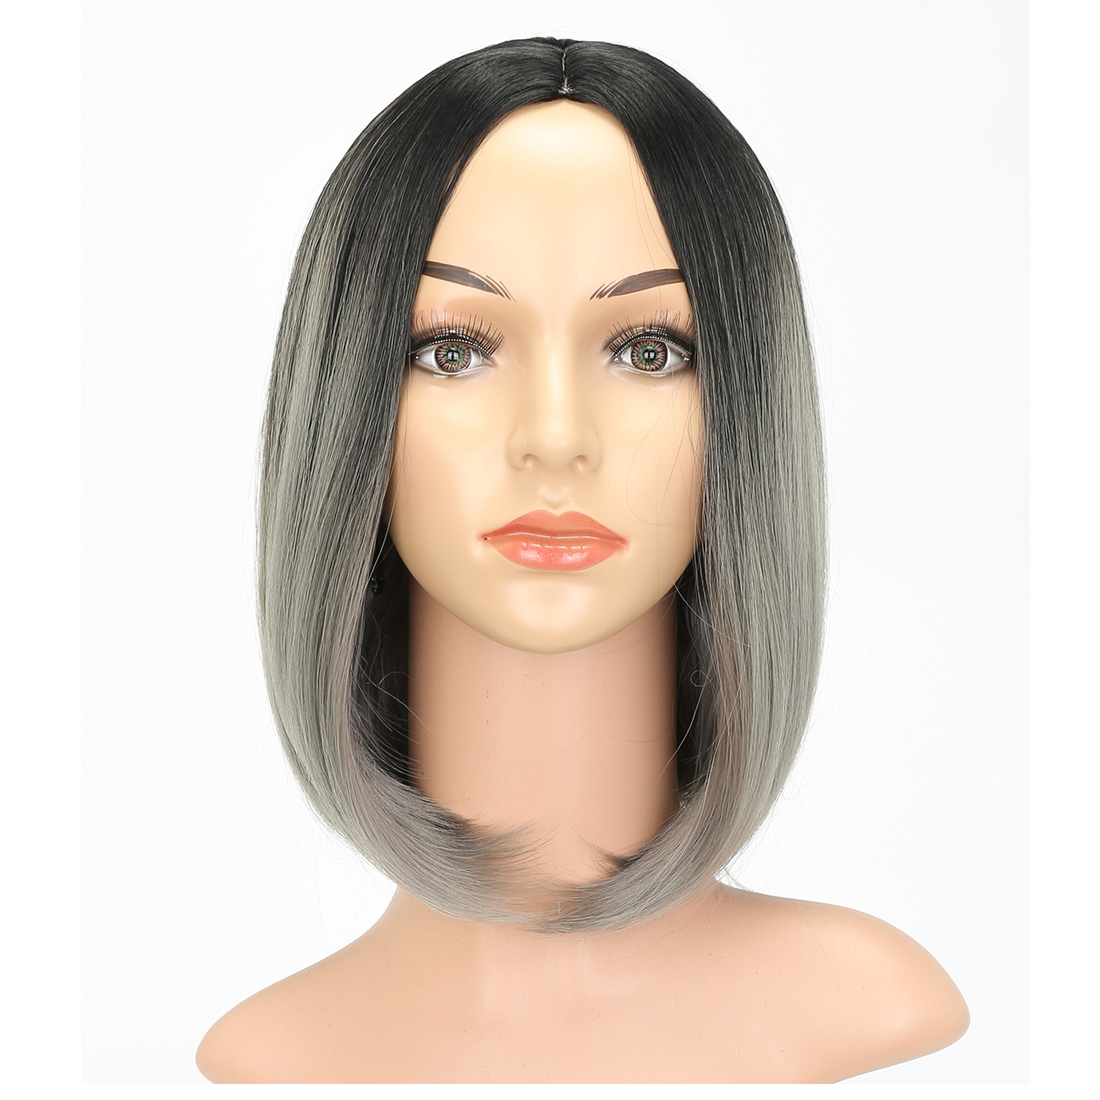 Short Bob Wigs For Women Synthetic Hair Heat Resistant Black to Gray 12inches